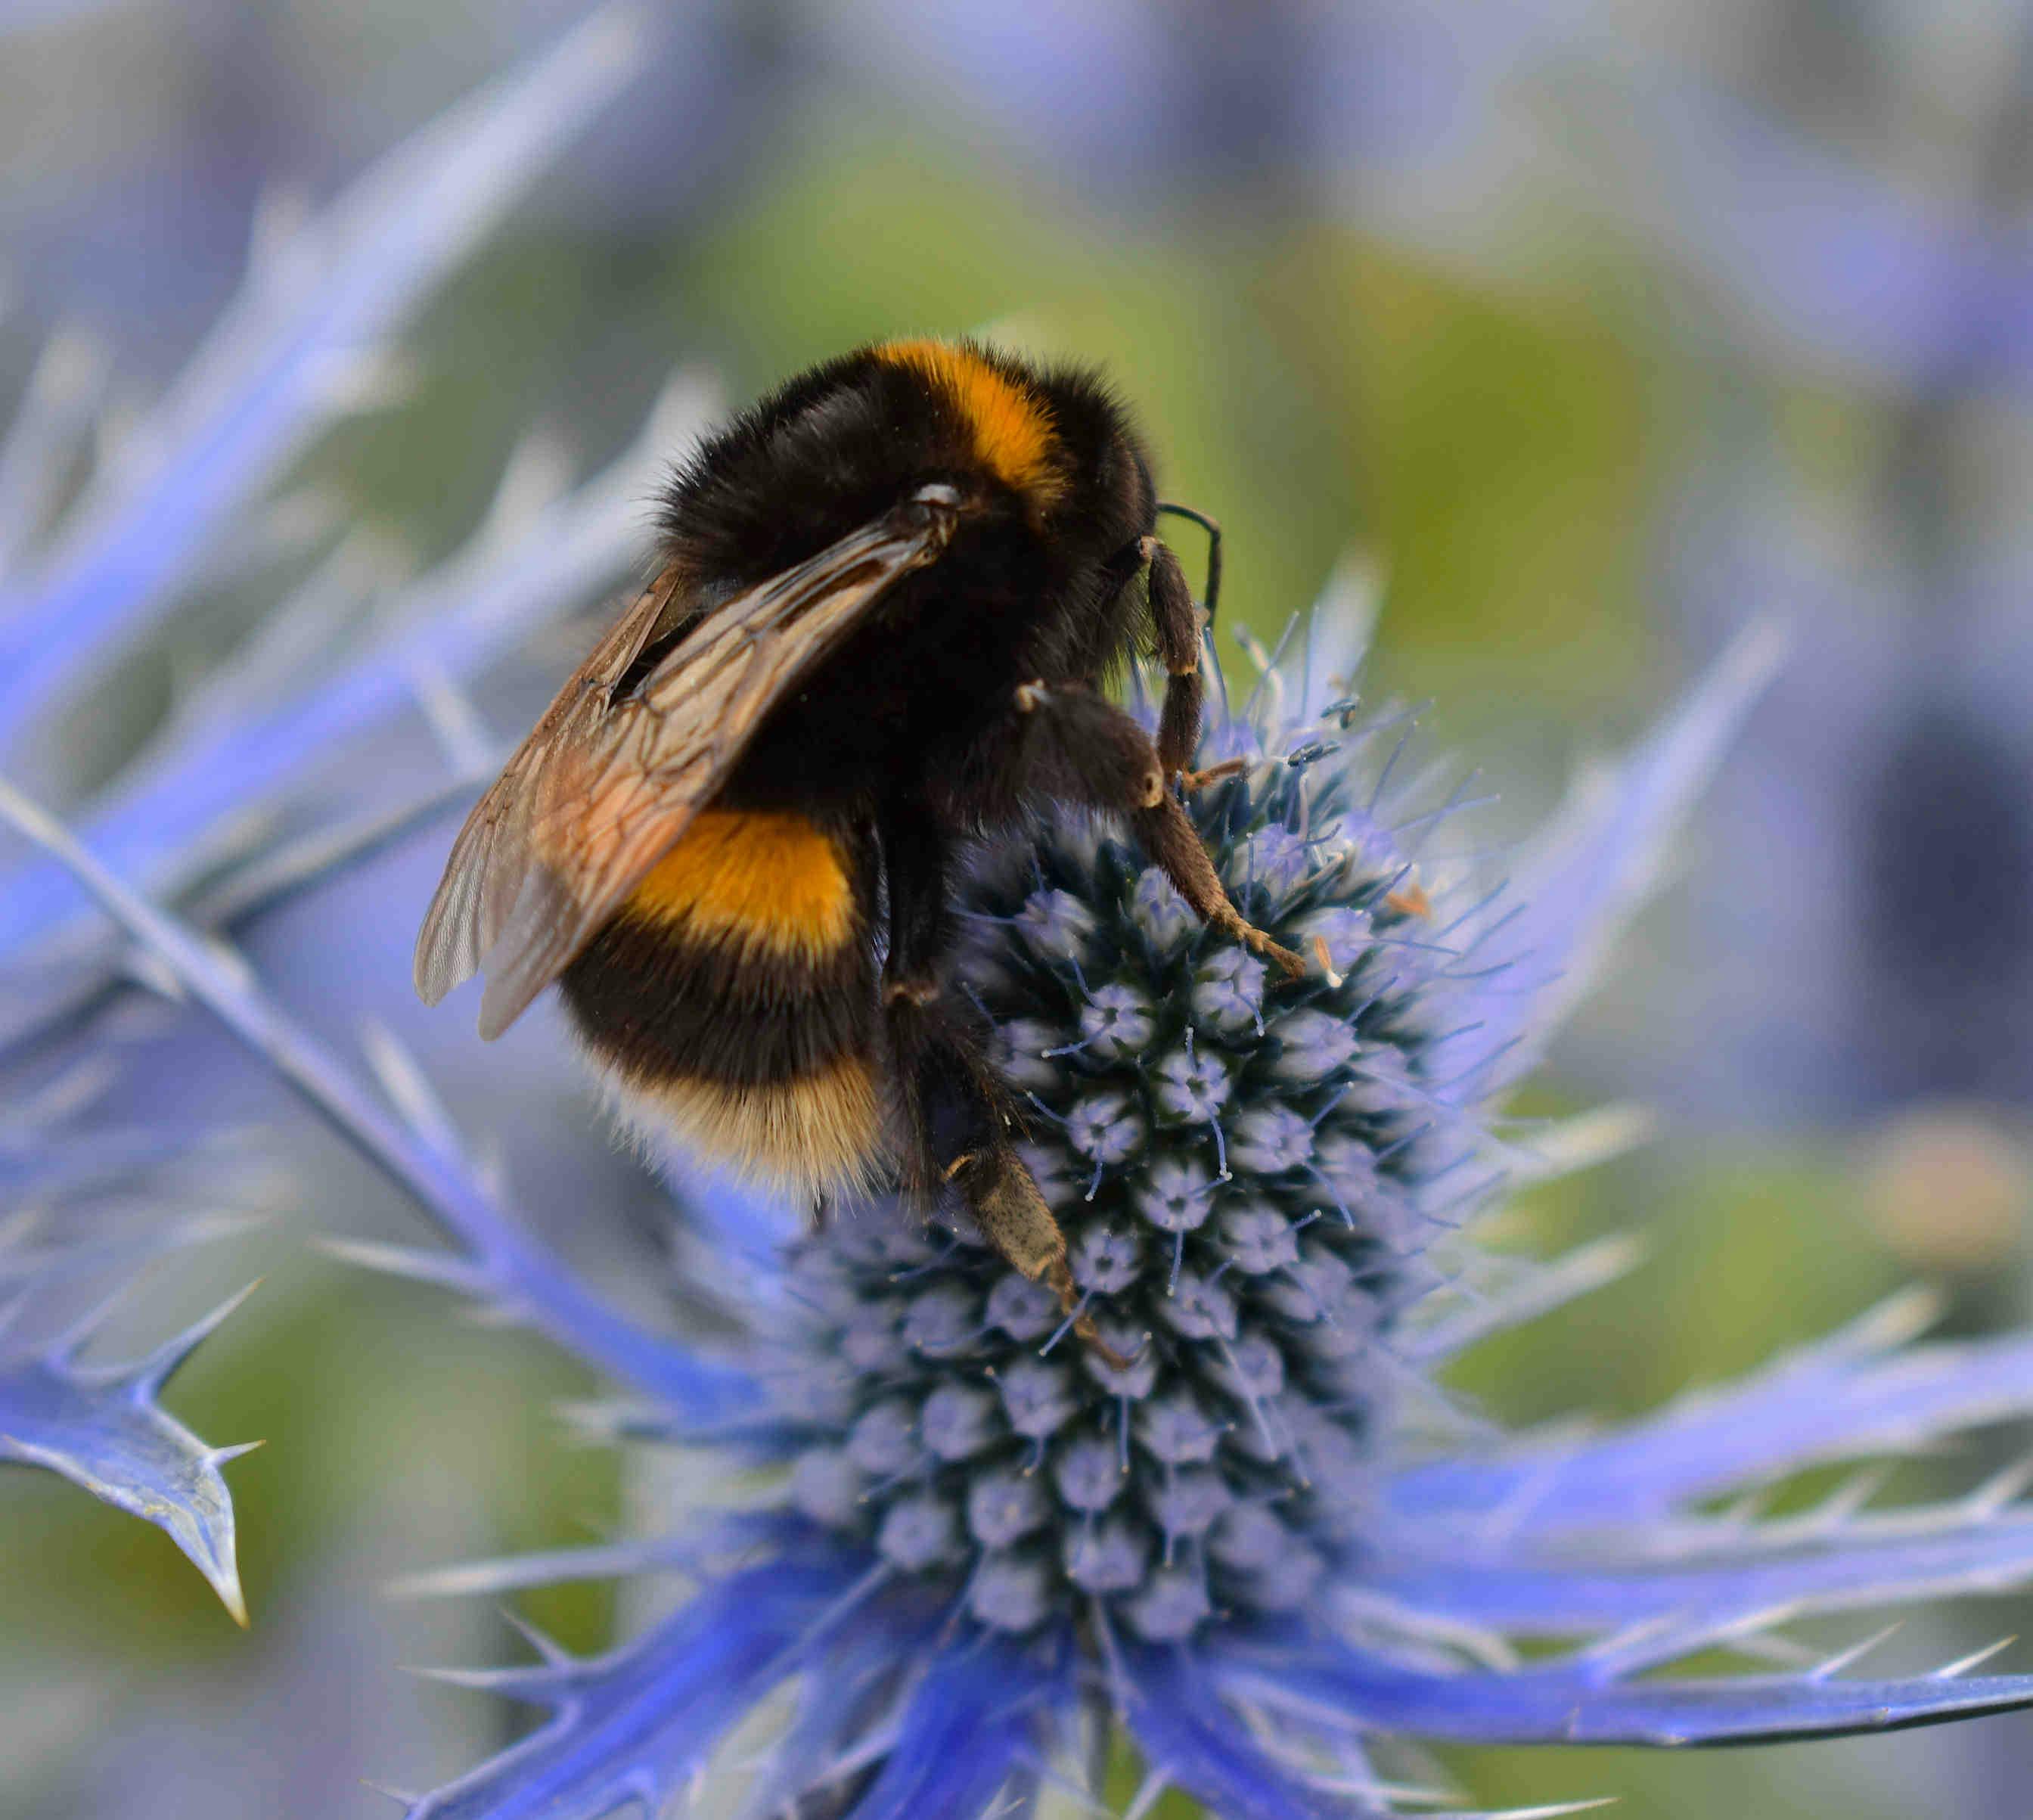 Ecosystem Role and Preservation of Bumblebees